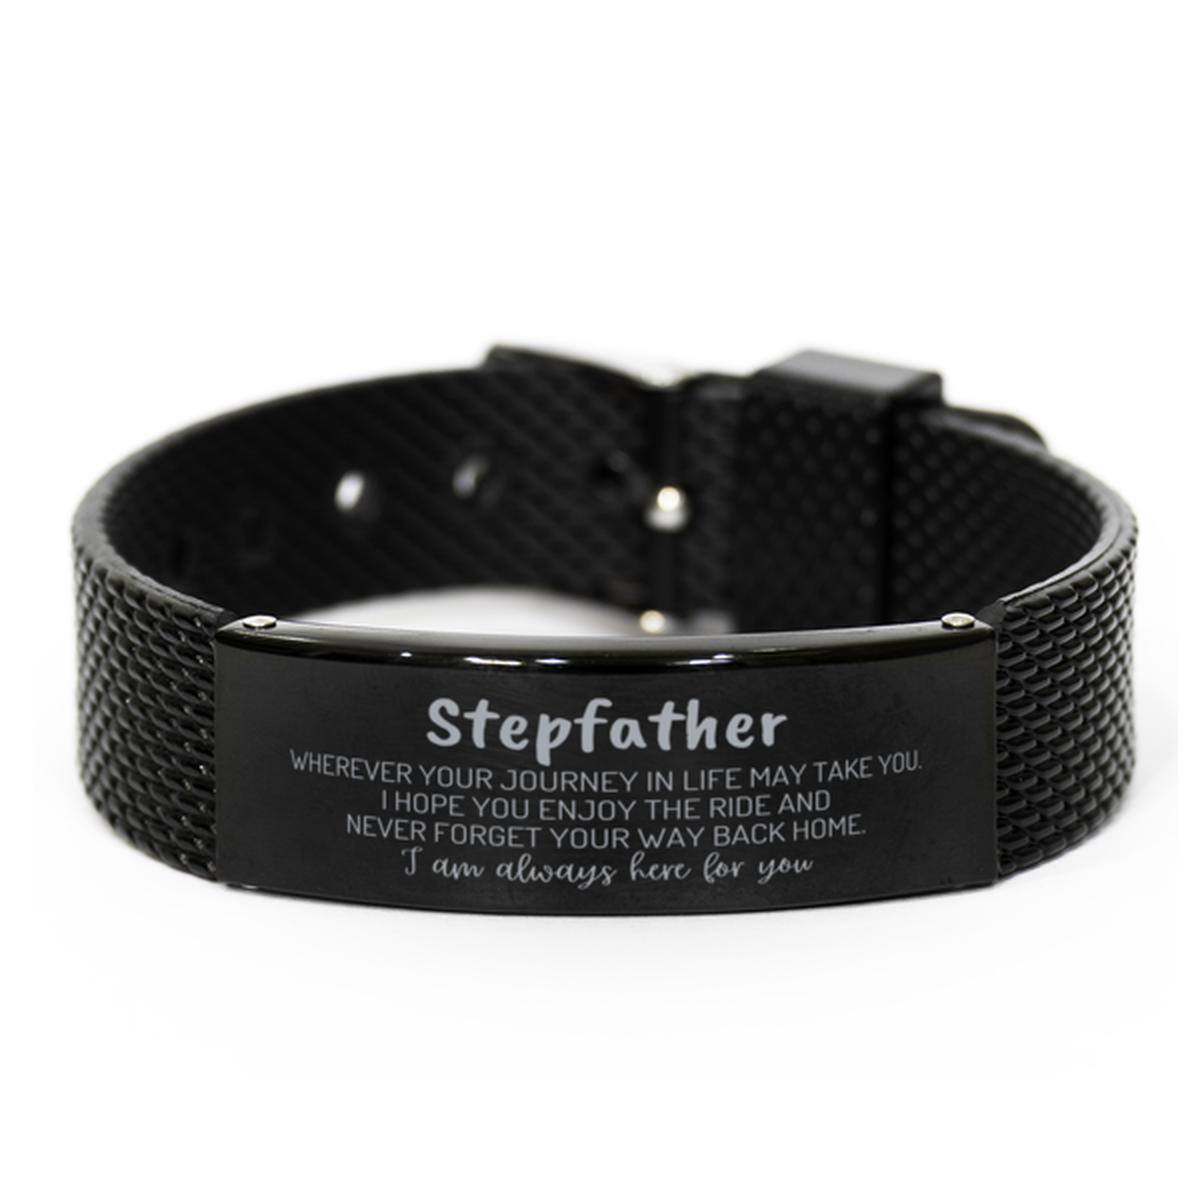 Stepfather wherever your journey in life may take you, I am always here for you Stepfather Black Shark Mesh Bracelet, Awesome Christmas Gifts For Stepfather, Stepfather Birthday Gifts for Men Women Family Loved One